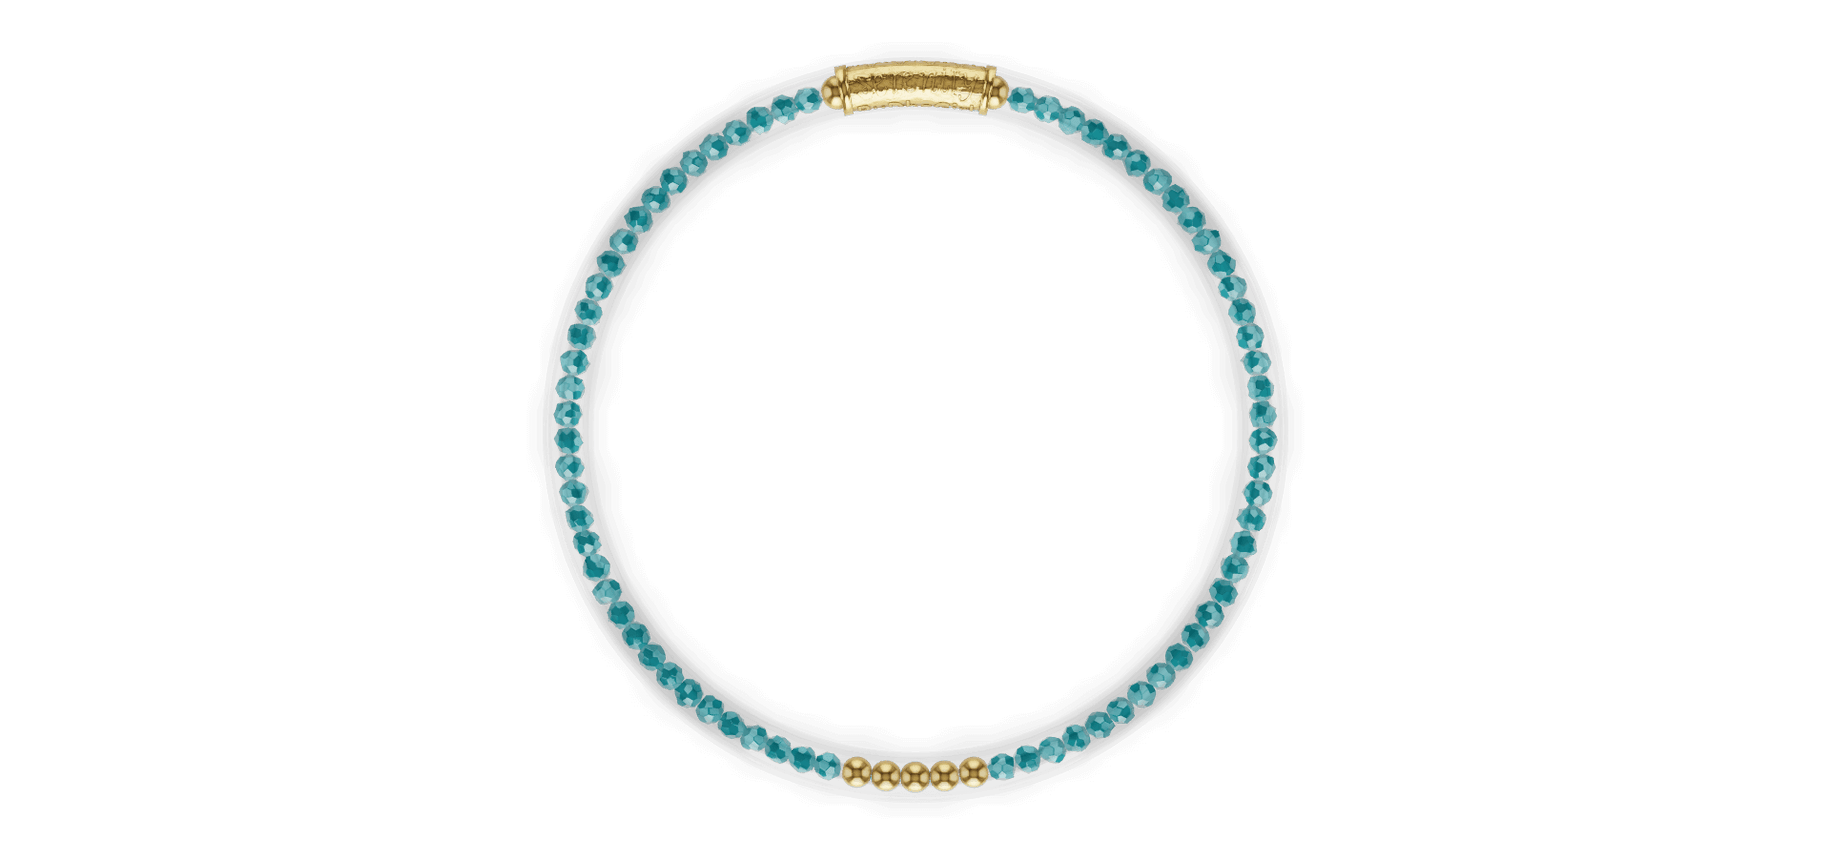 Blue Apatite Crystal | Luxe Bangles and Bracelets | BuDhaGirl